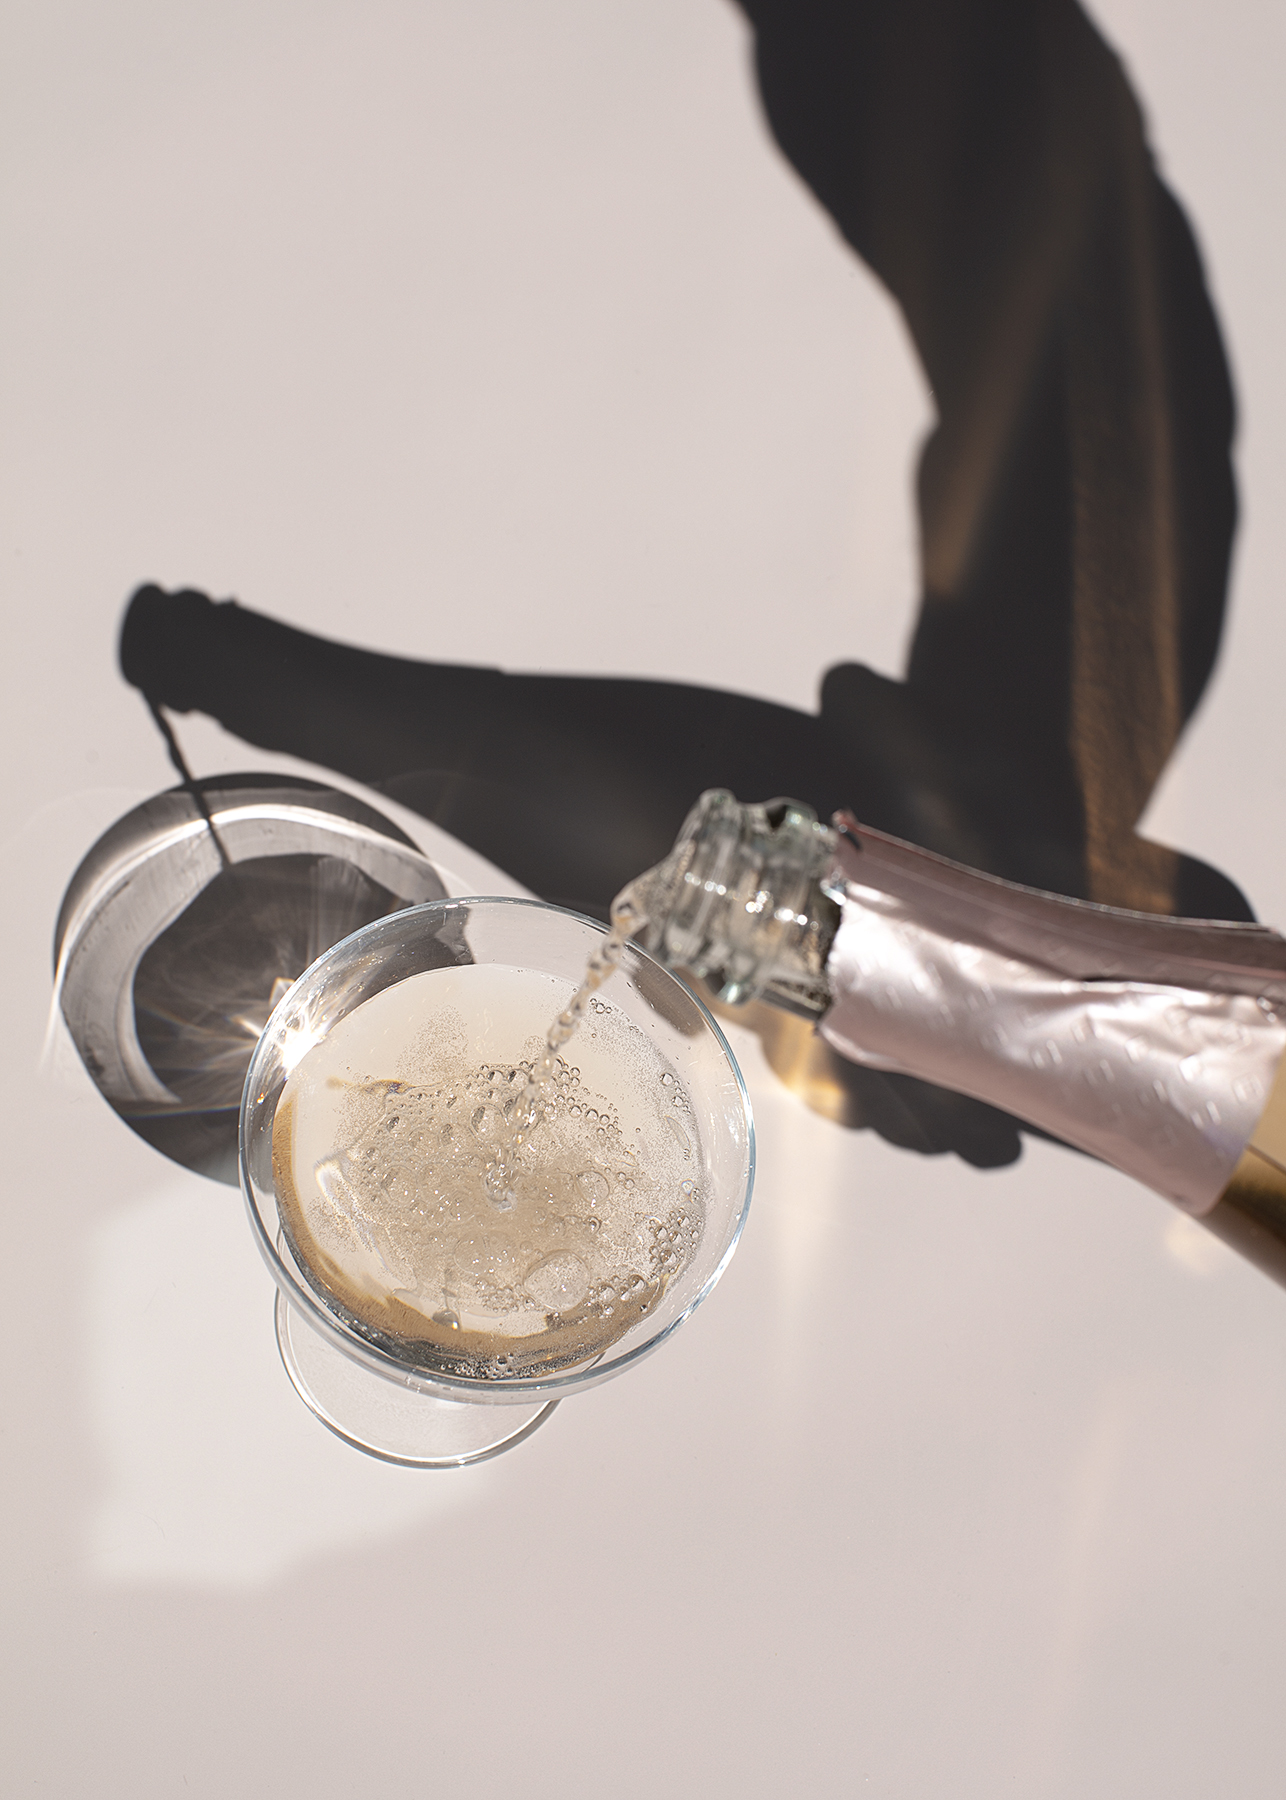 Stock image of champagne being poured into a glass to showcase celebration